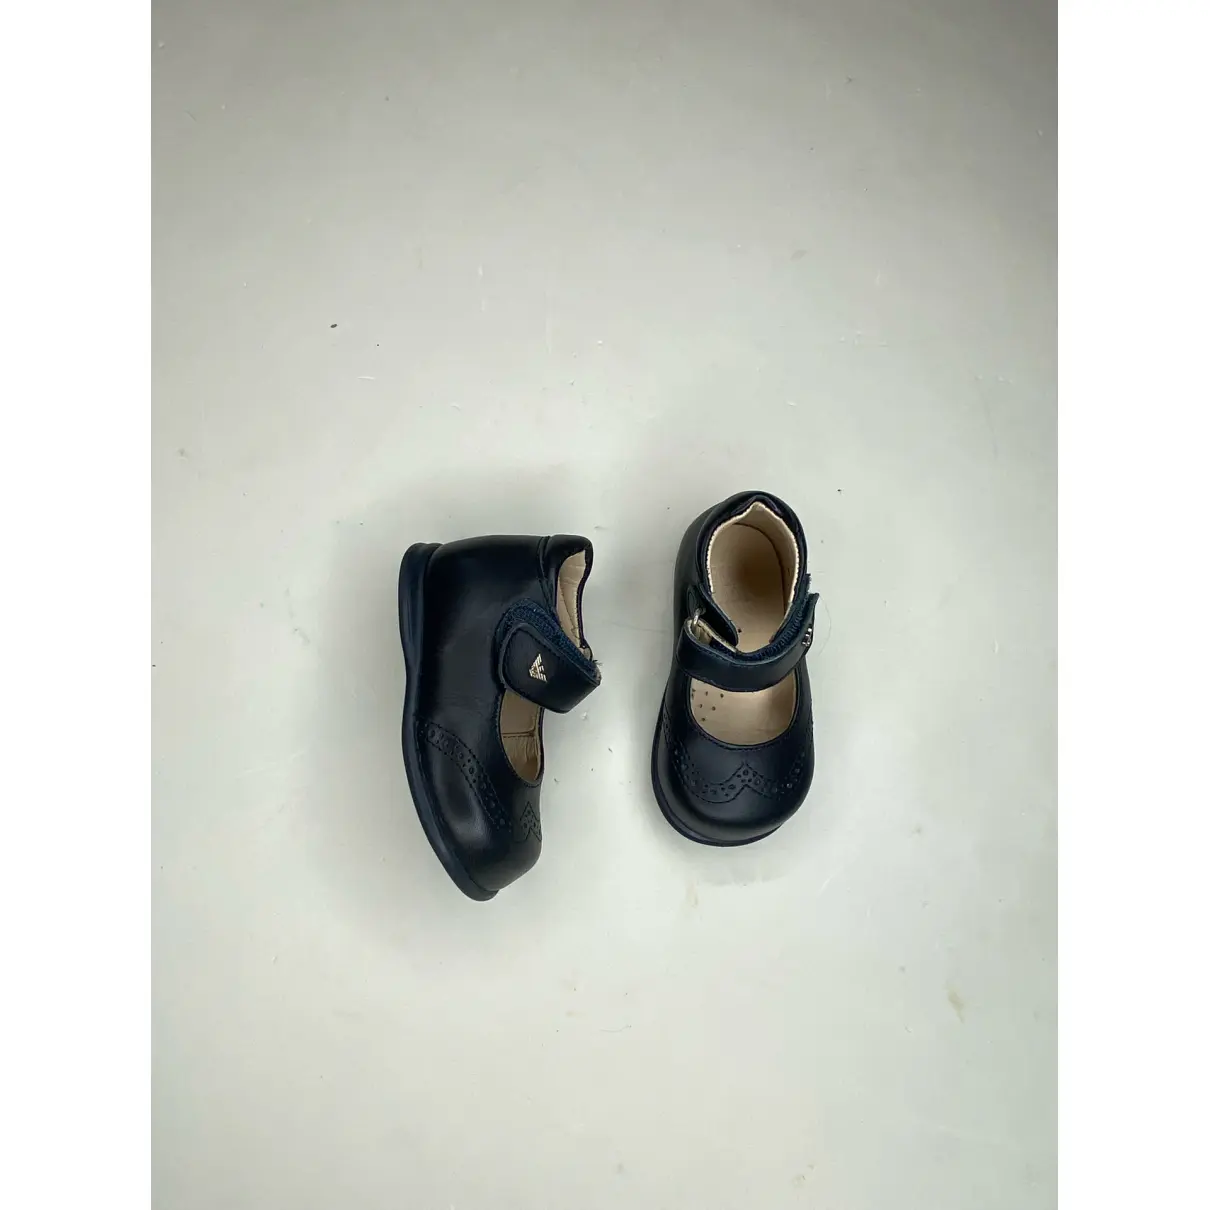 Buy Armani Baby Leather sandals online